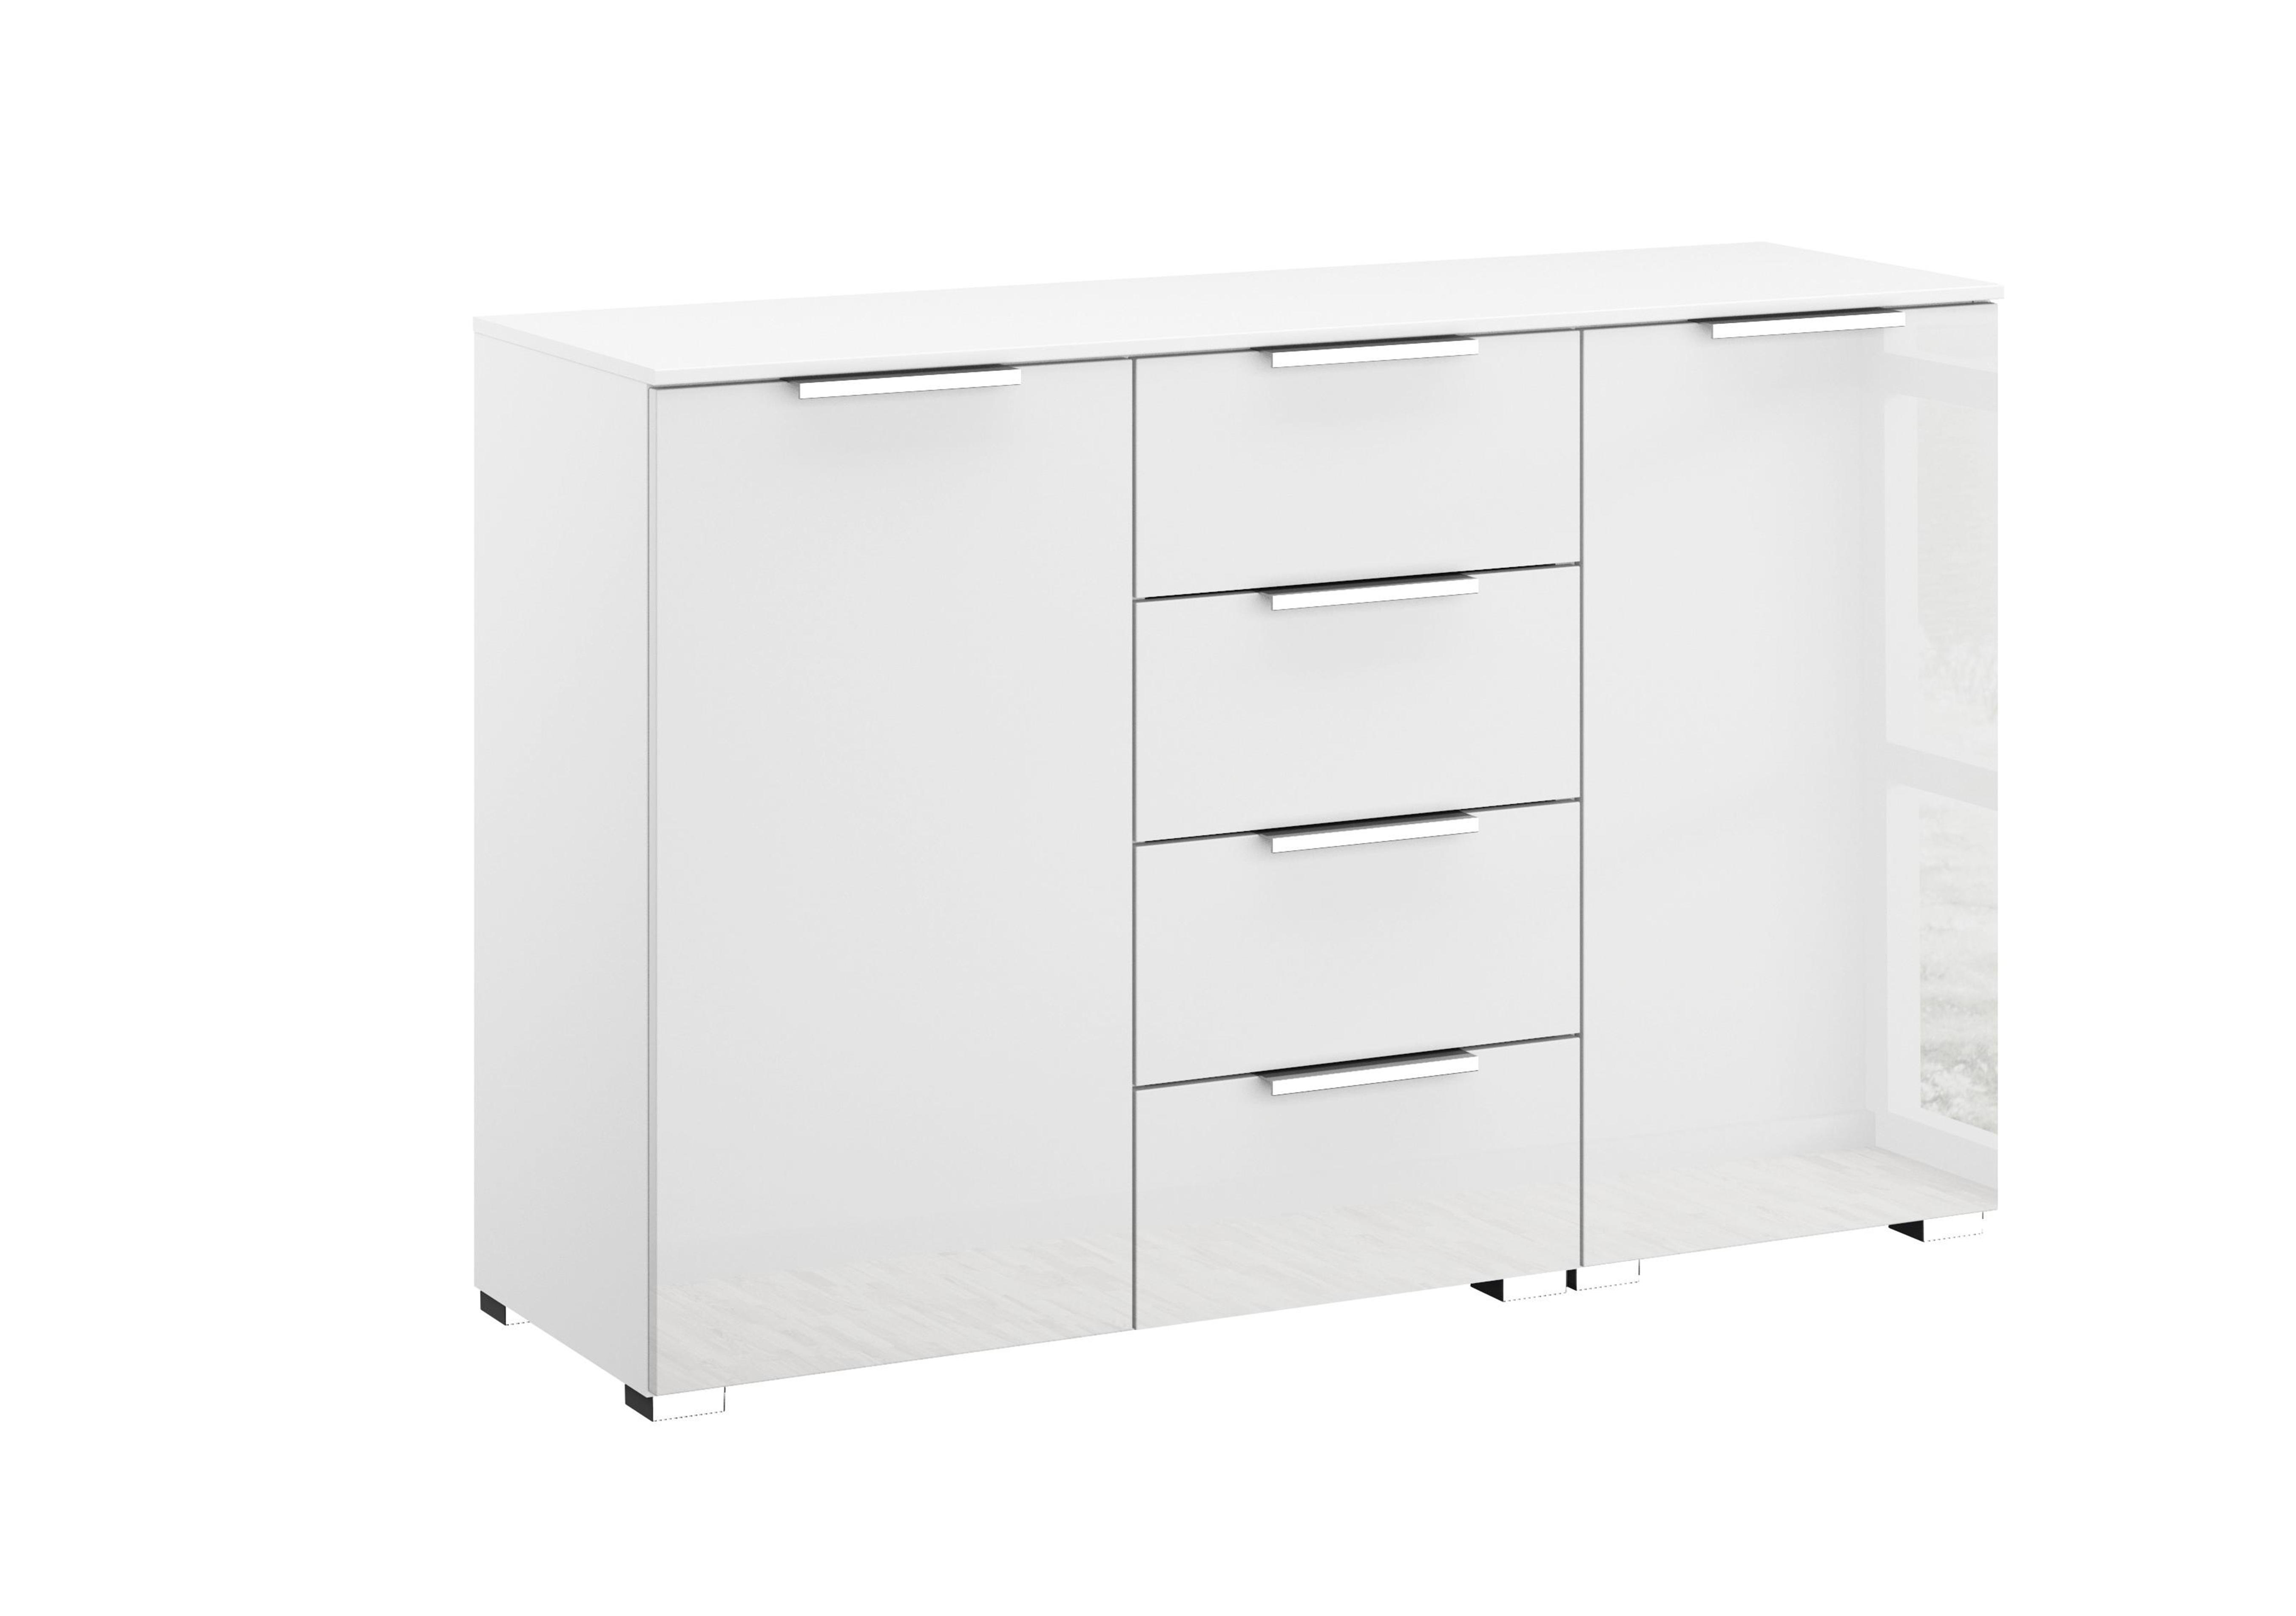 Formes Glass 4 Drawer 2 Door Chest in A131b White White Front on Furniture Village